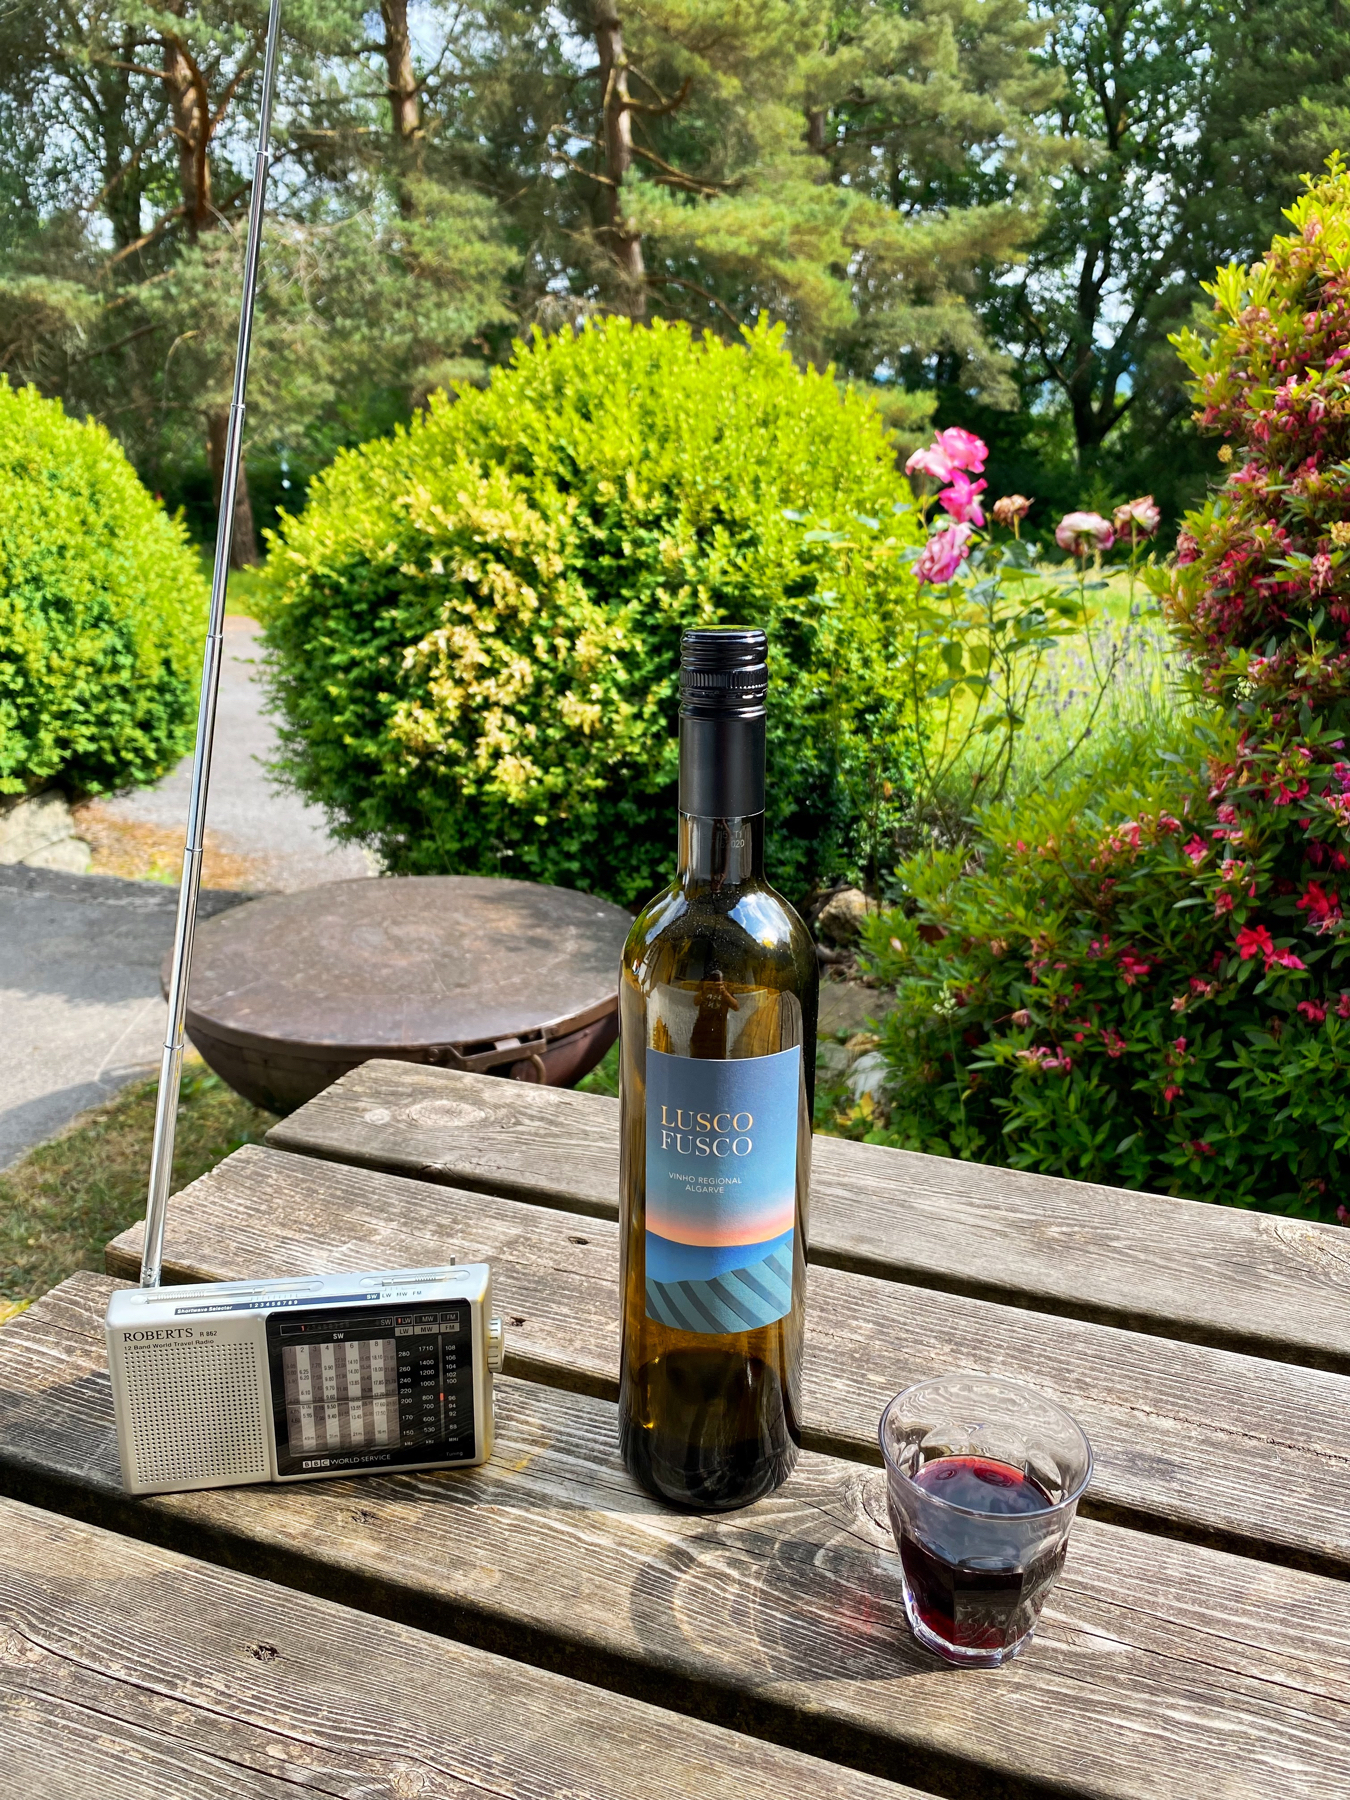 Bottle of red wine, glass of red wine and small radio on a wooden table with a garden backdrop